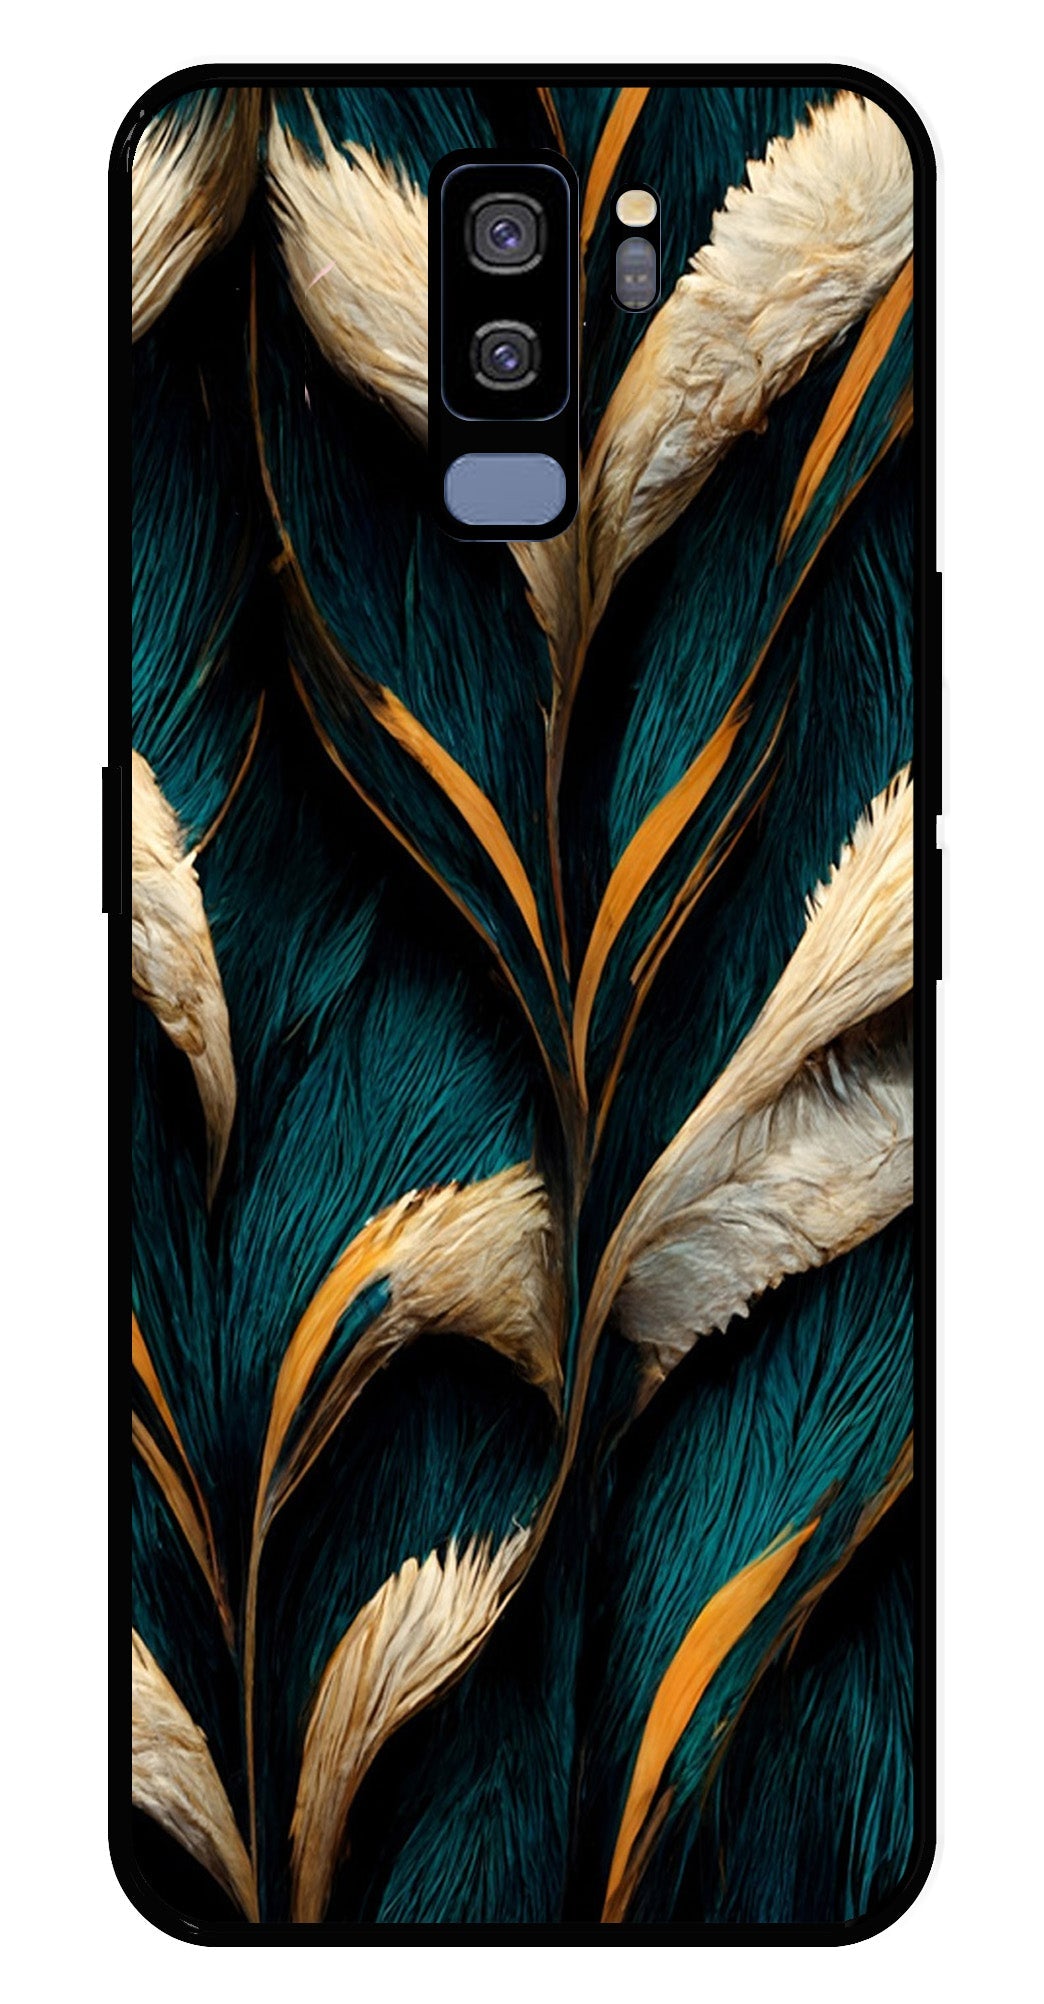 Feathers Metal Mobile Case for Samsung Galaxy S9 Plus   (Design No -30)